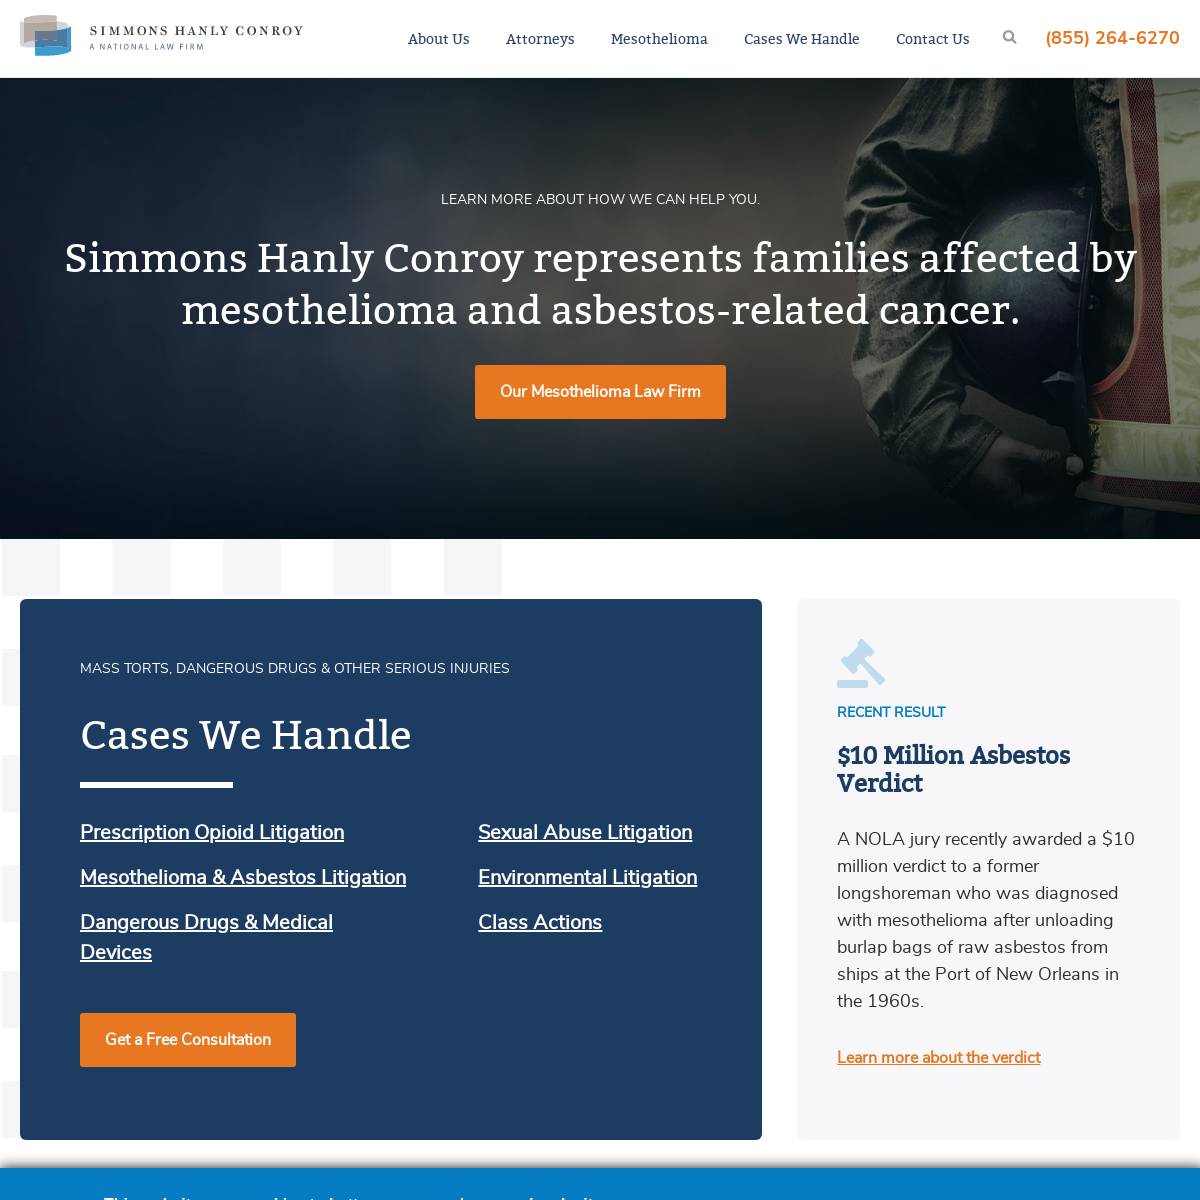 A complete backup of simmonsfirm.com